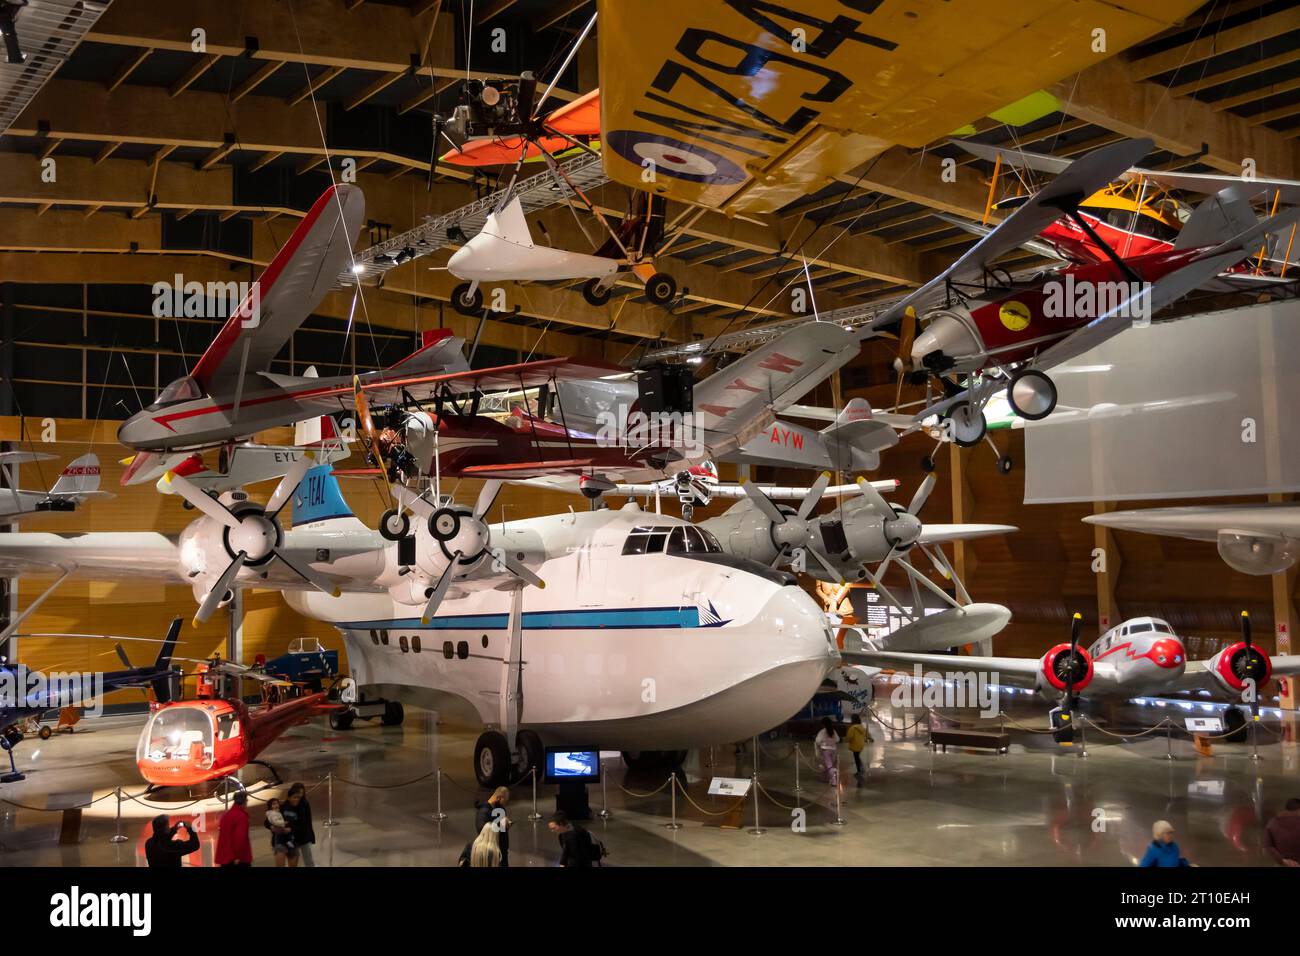 Aviation Hall, Museum of Transport and Technology, MOTAT, Auckland, North Island, New Zealand Stock Photo